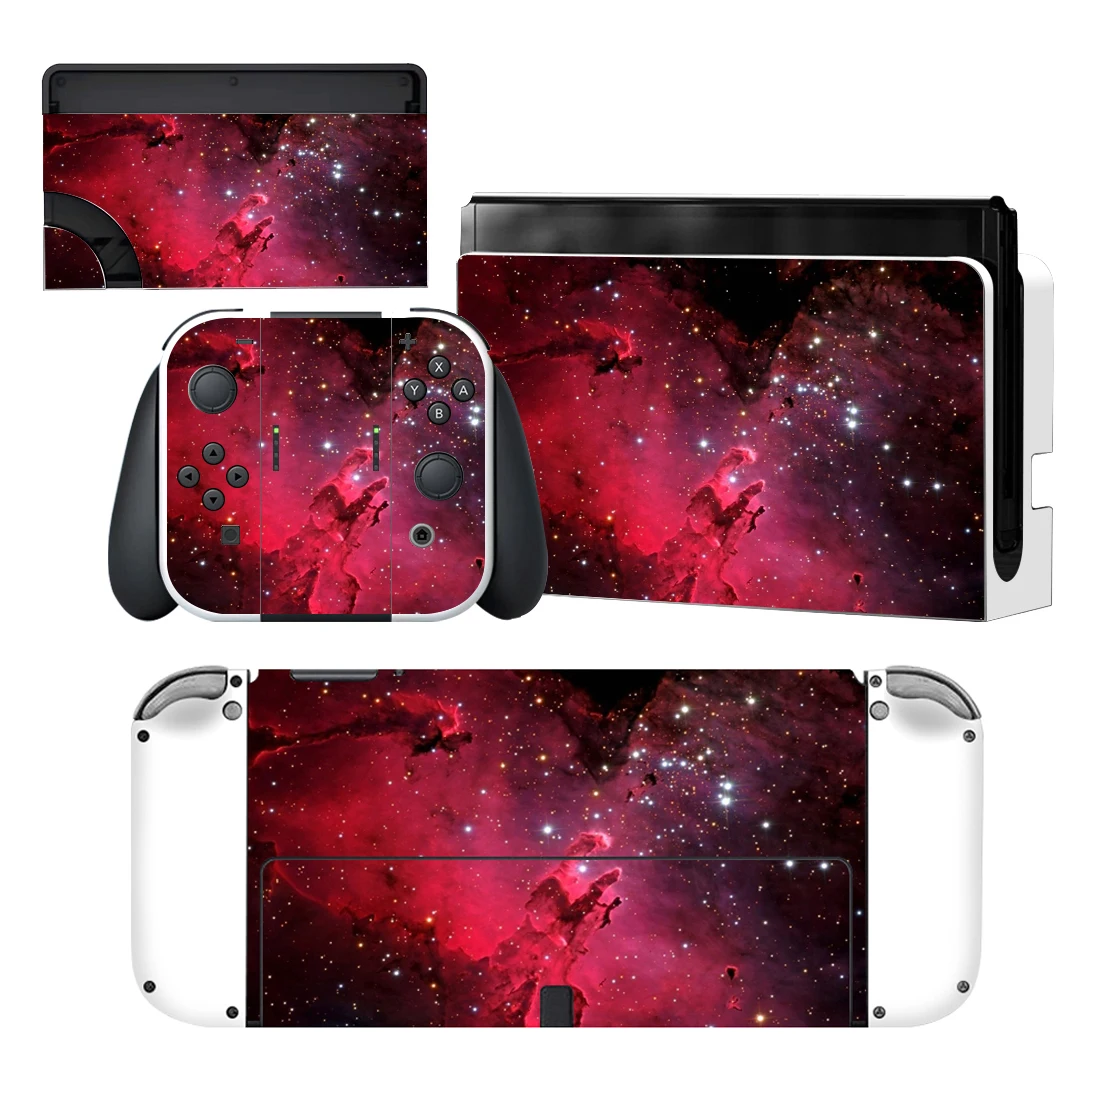 

Starry Sky Star Nintendoswitch Skin Cover Sticker Decal for Nintendo Switch OLED Console Joy-con Controller Dock Vinyl